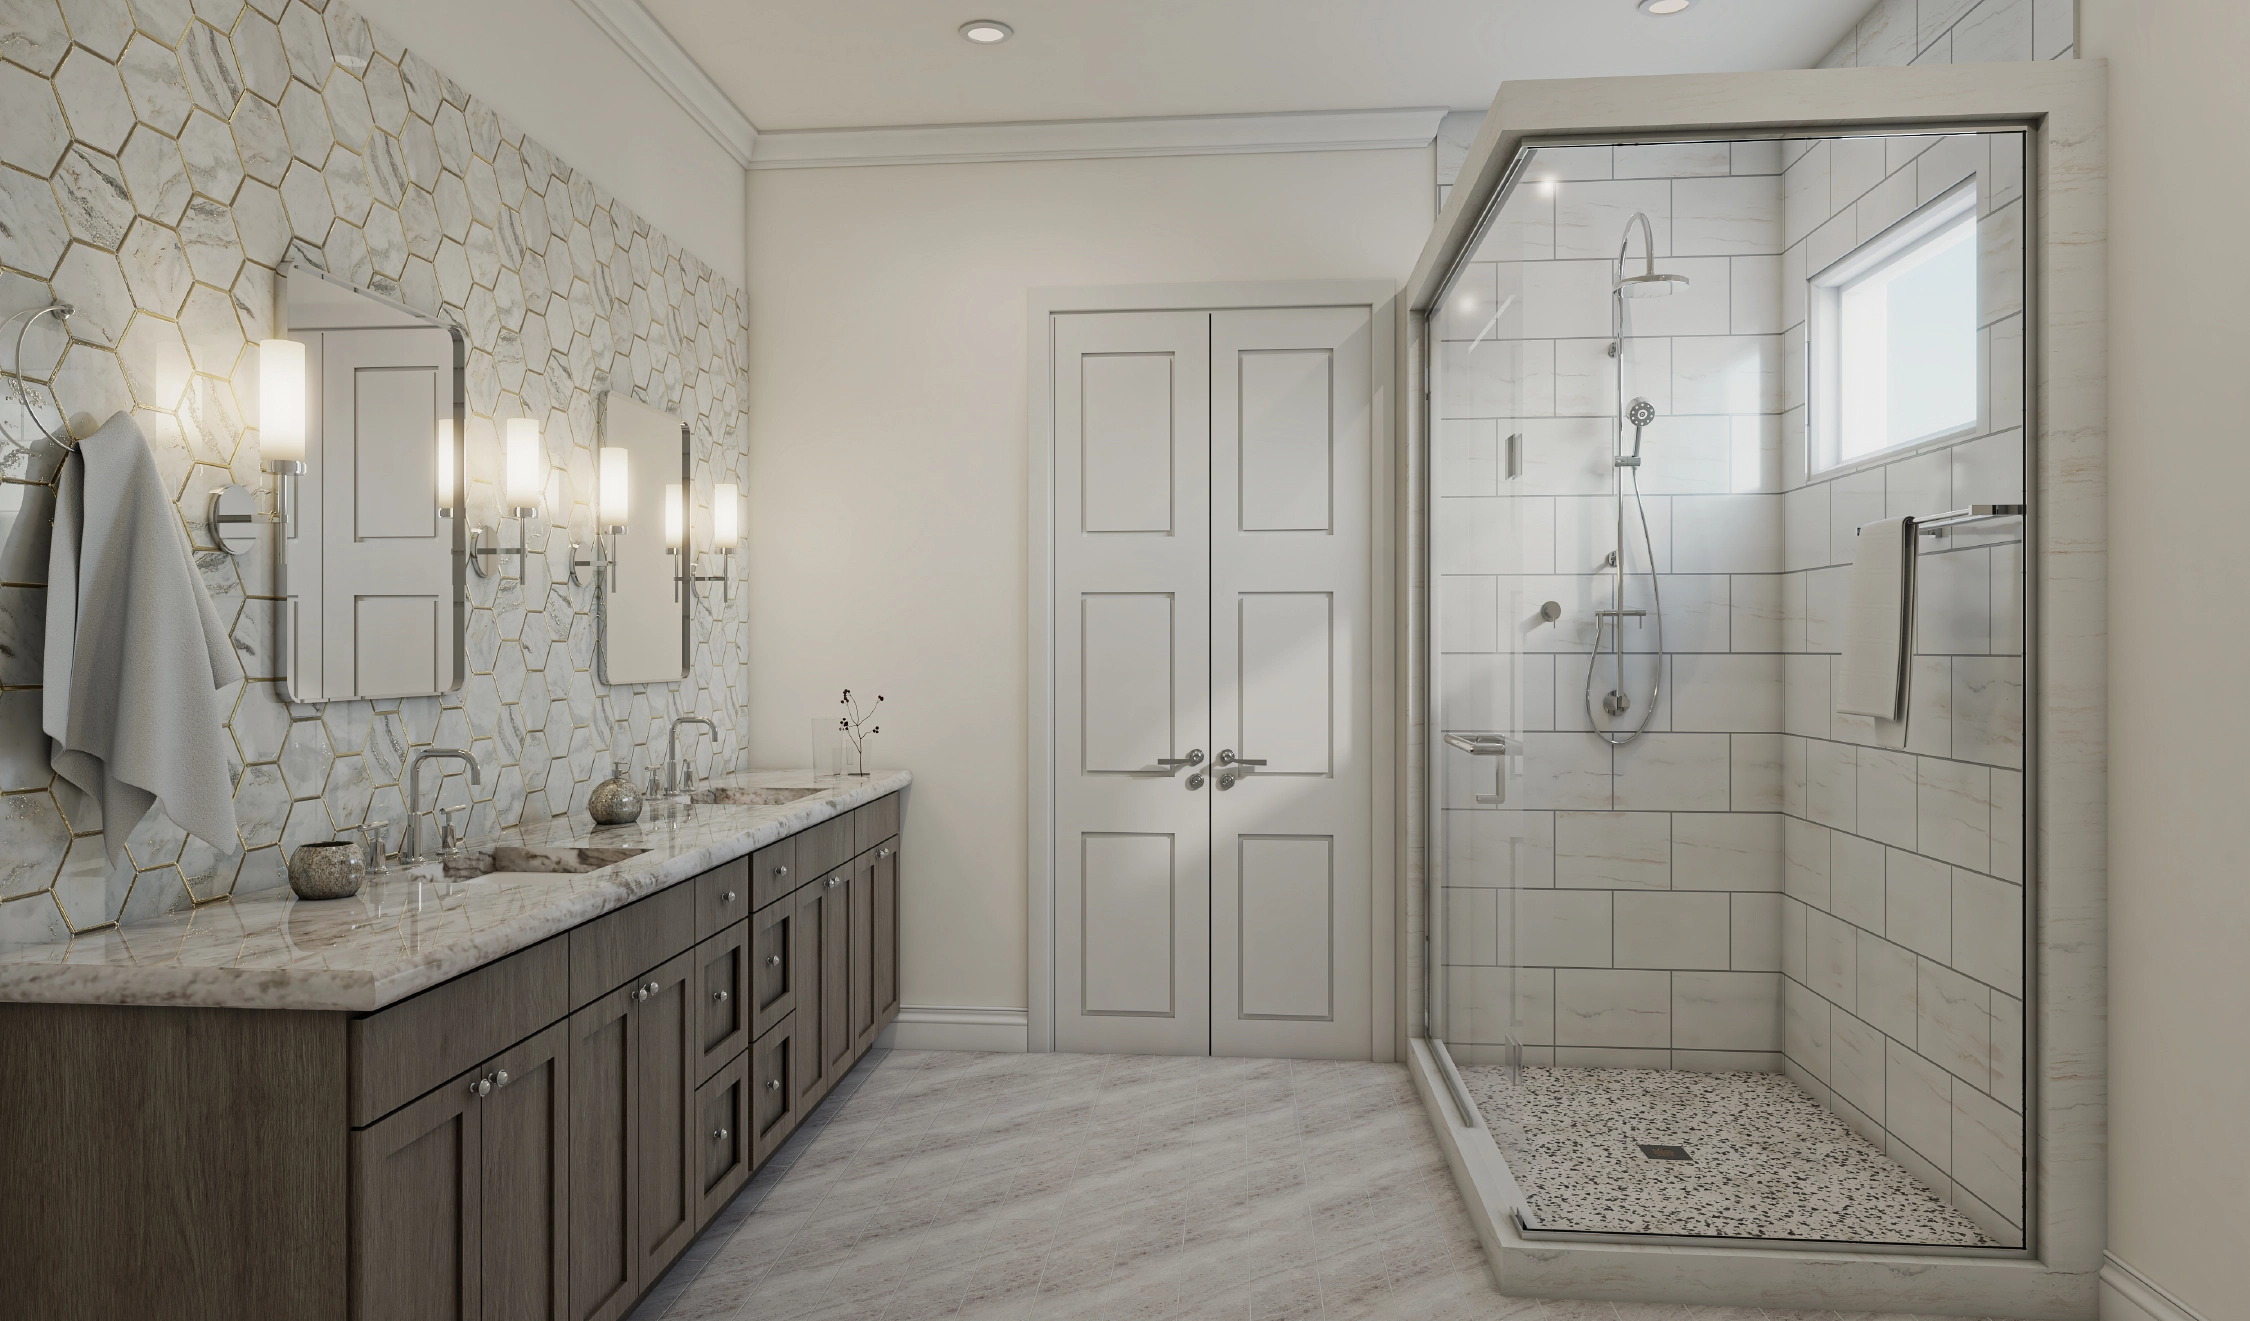 Elegantly designed bathroom with cut pieces of marble tiles, lamp fixtures, and accessories.